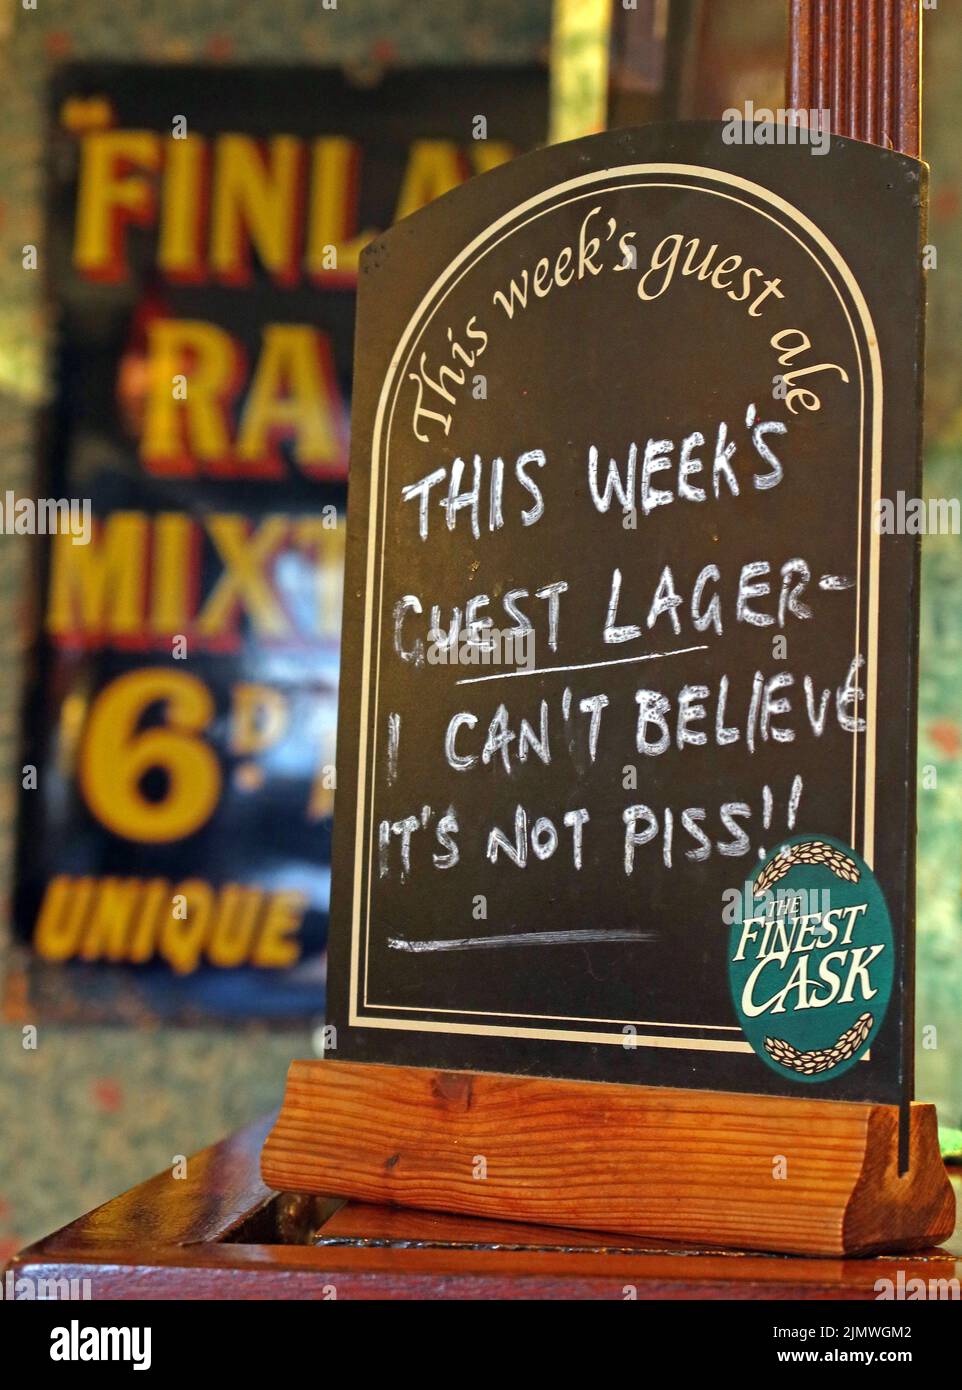 Sign on the bar at The Albion, Park Road, Chester, Cheshire, England, UK - This weeks guest lager, I cant believe its not piss Stock Photo